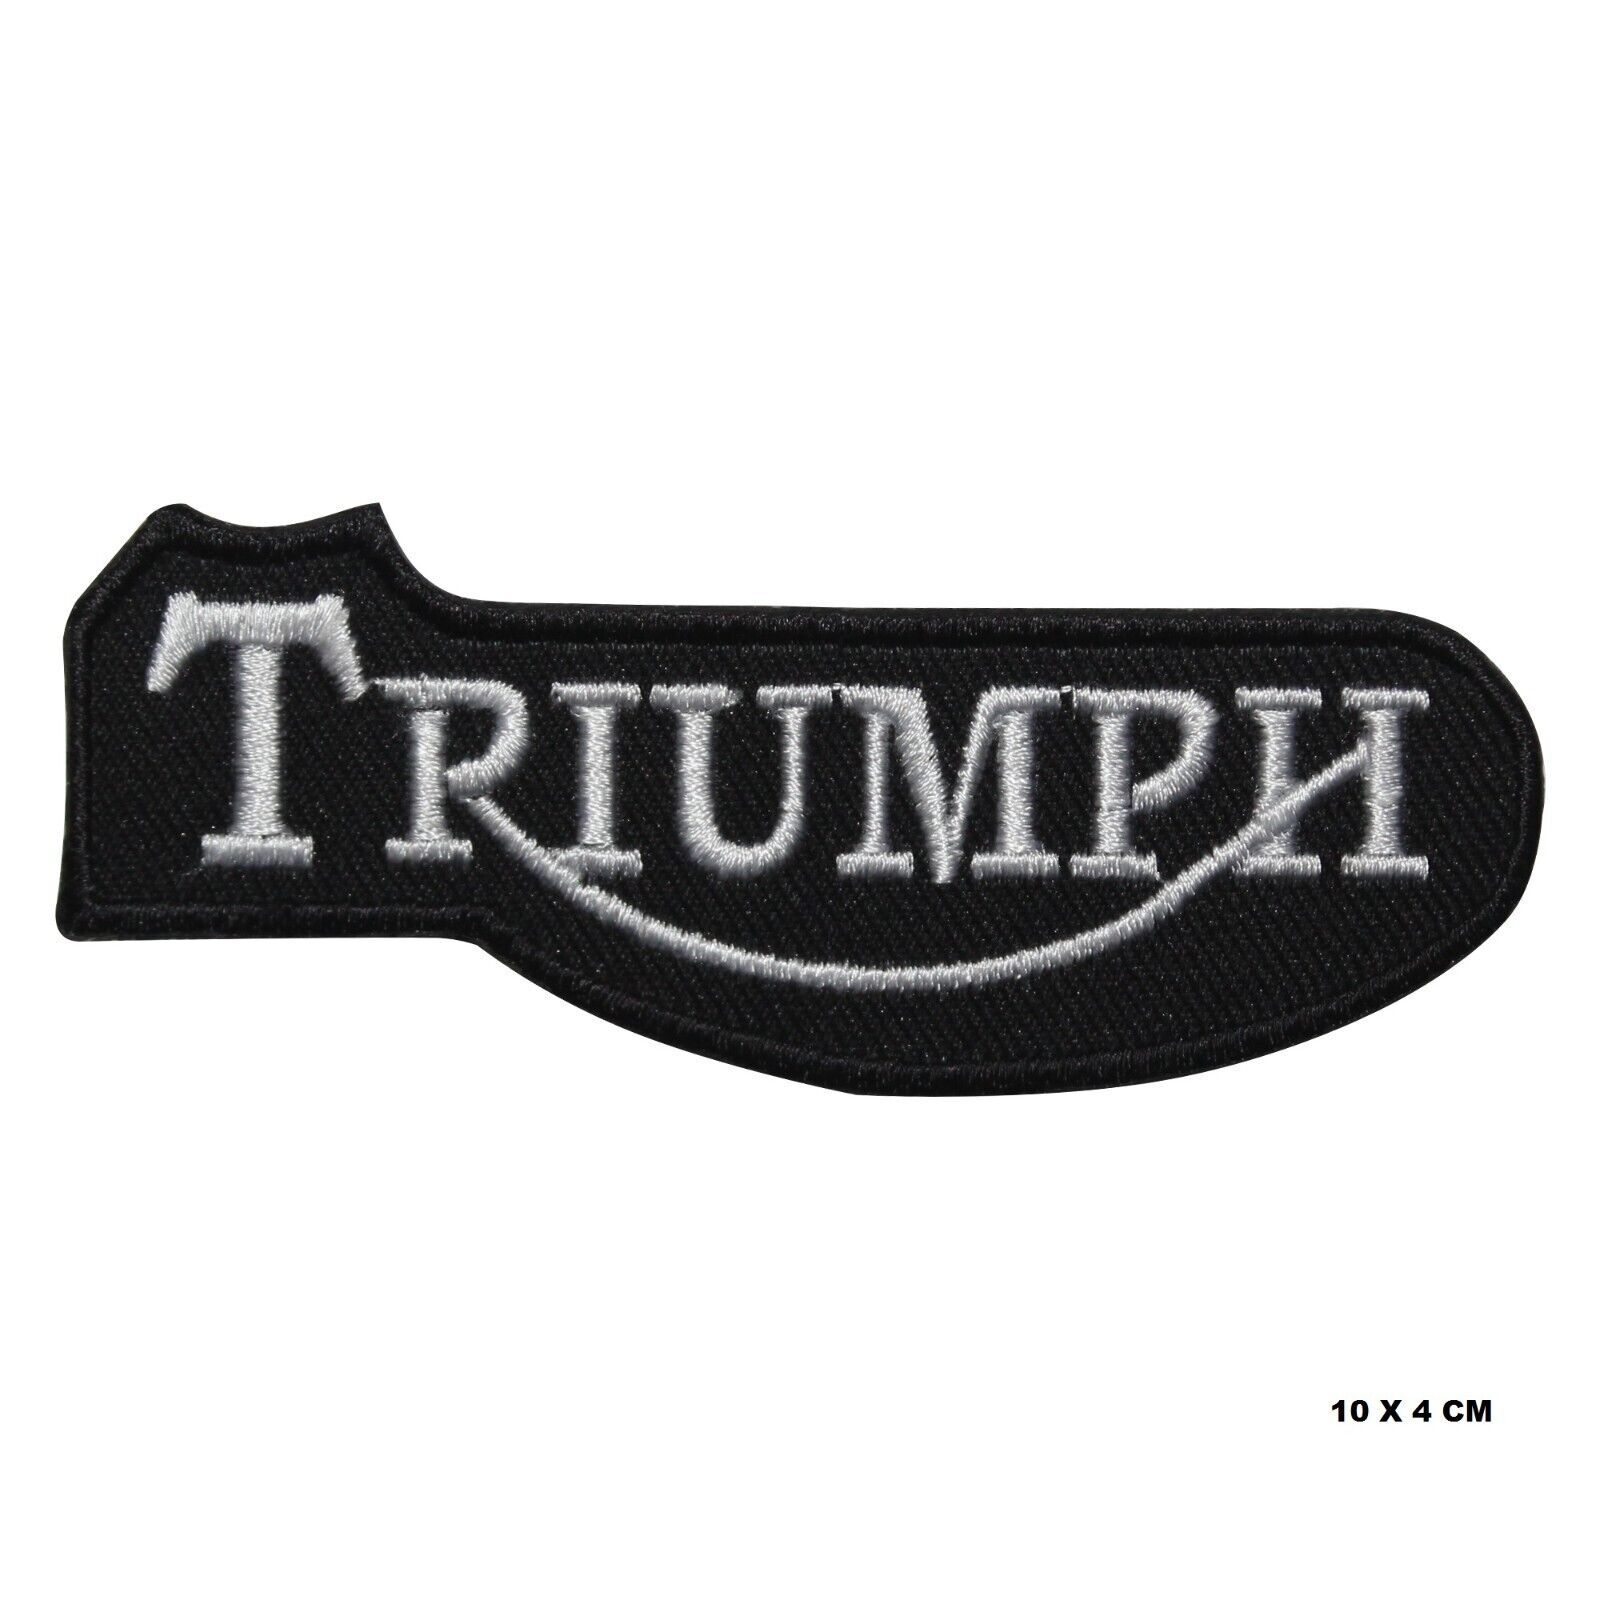 Triumph MotorBike Brand Logo Patch Iron On Patch Sew On Embroidered Patch